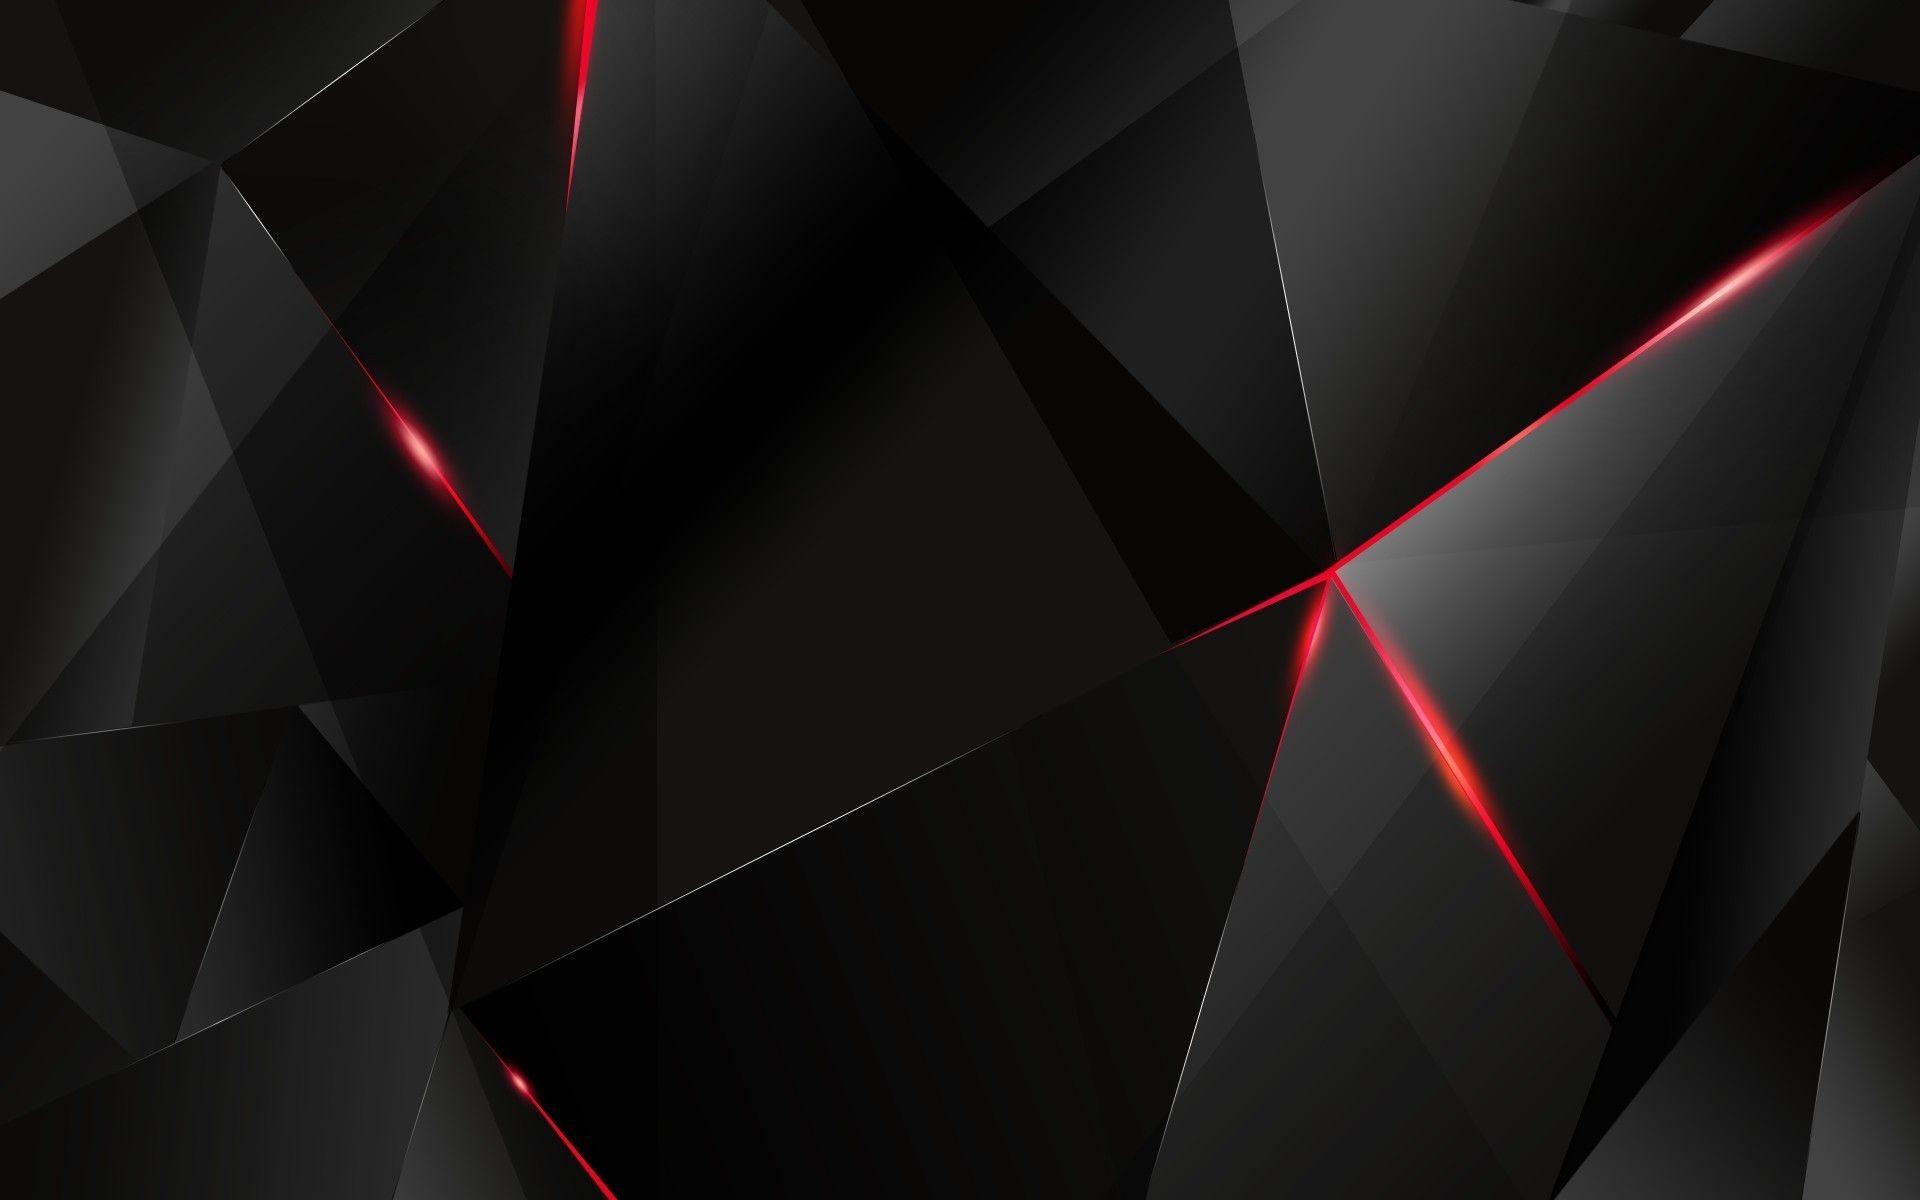 Red And Black Wallpaper HD